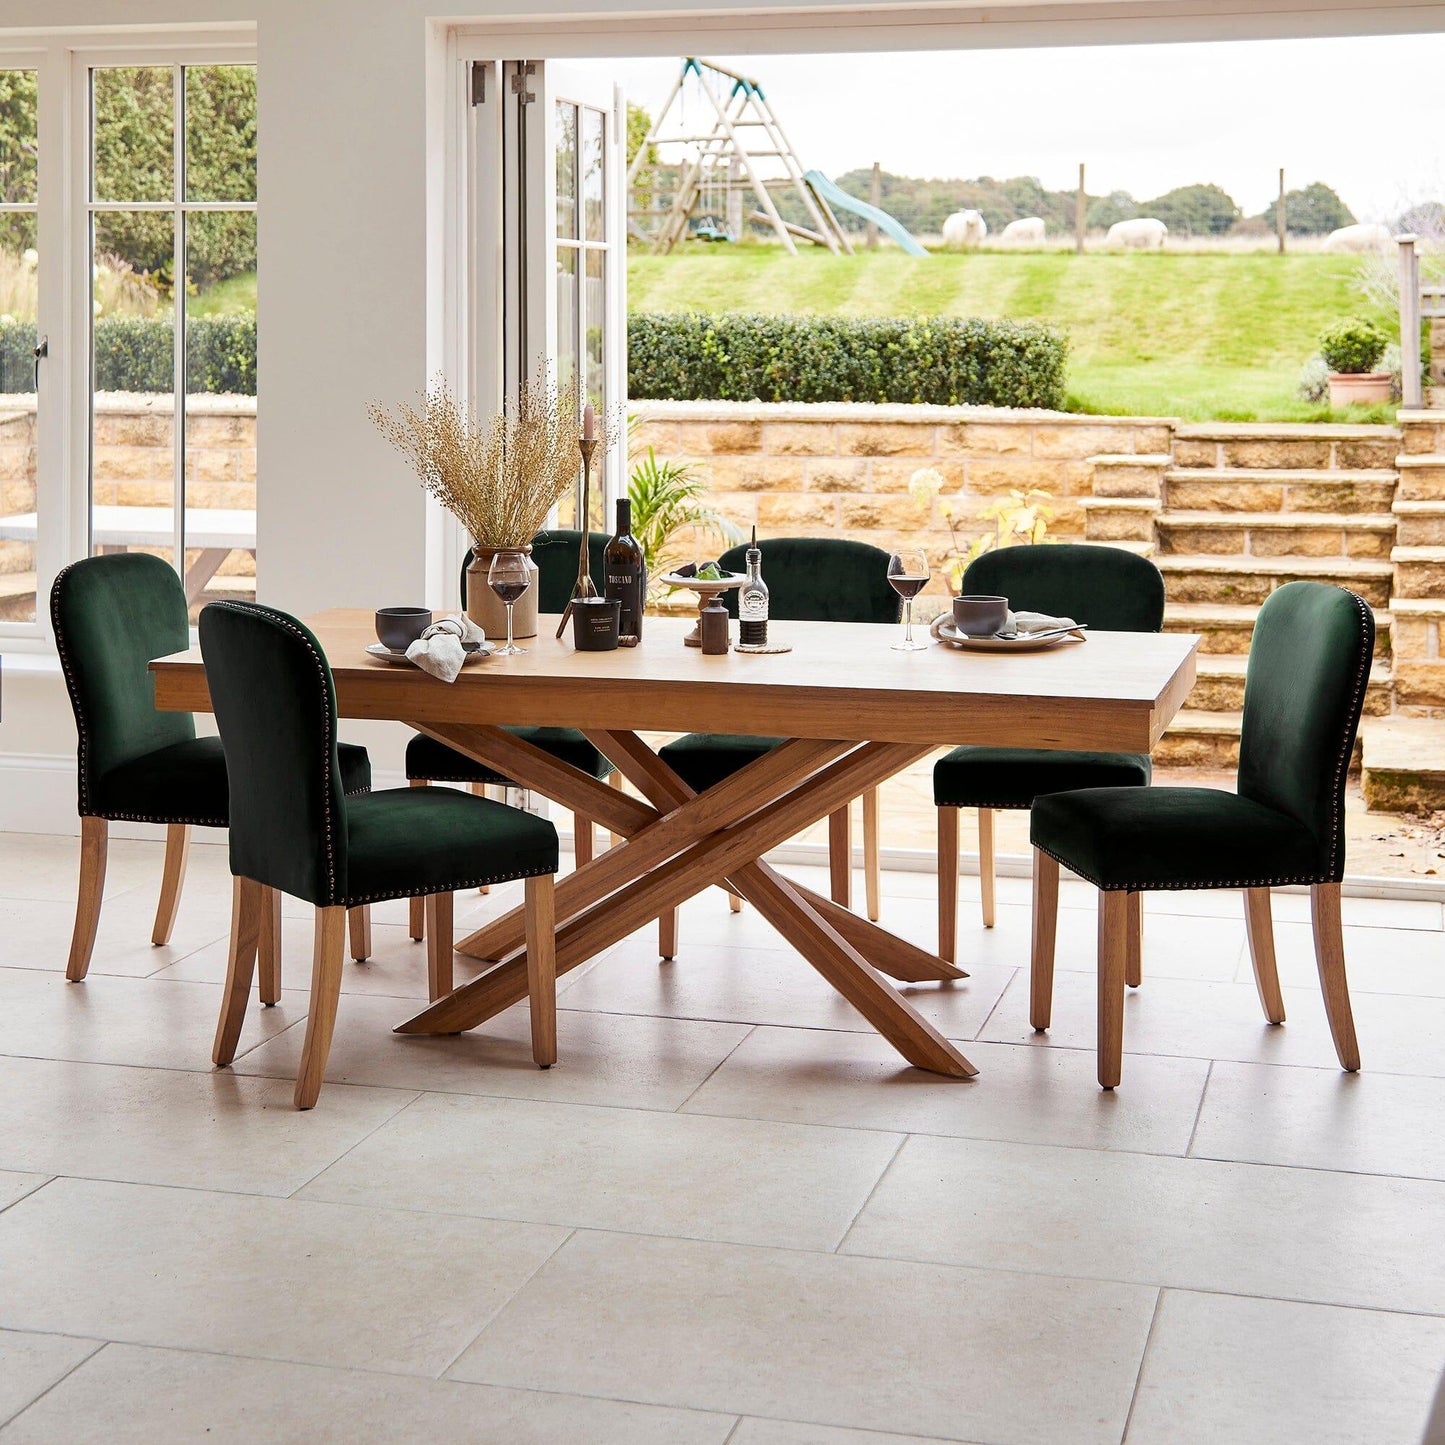 Amelia Oak Extending Dining Table Set - 6 Seater - Edward Green Dining Chairs with Light Oak Legs - Laura James